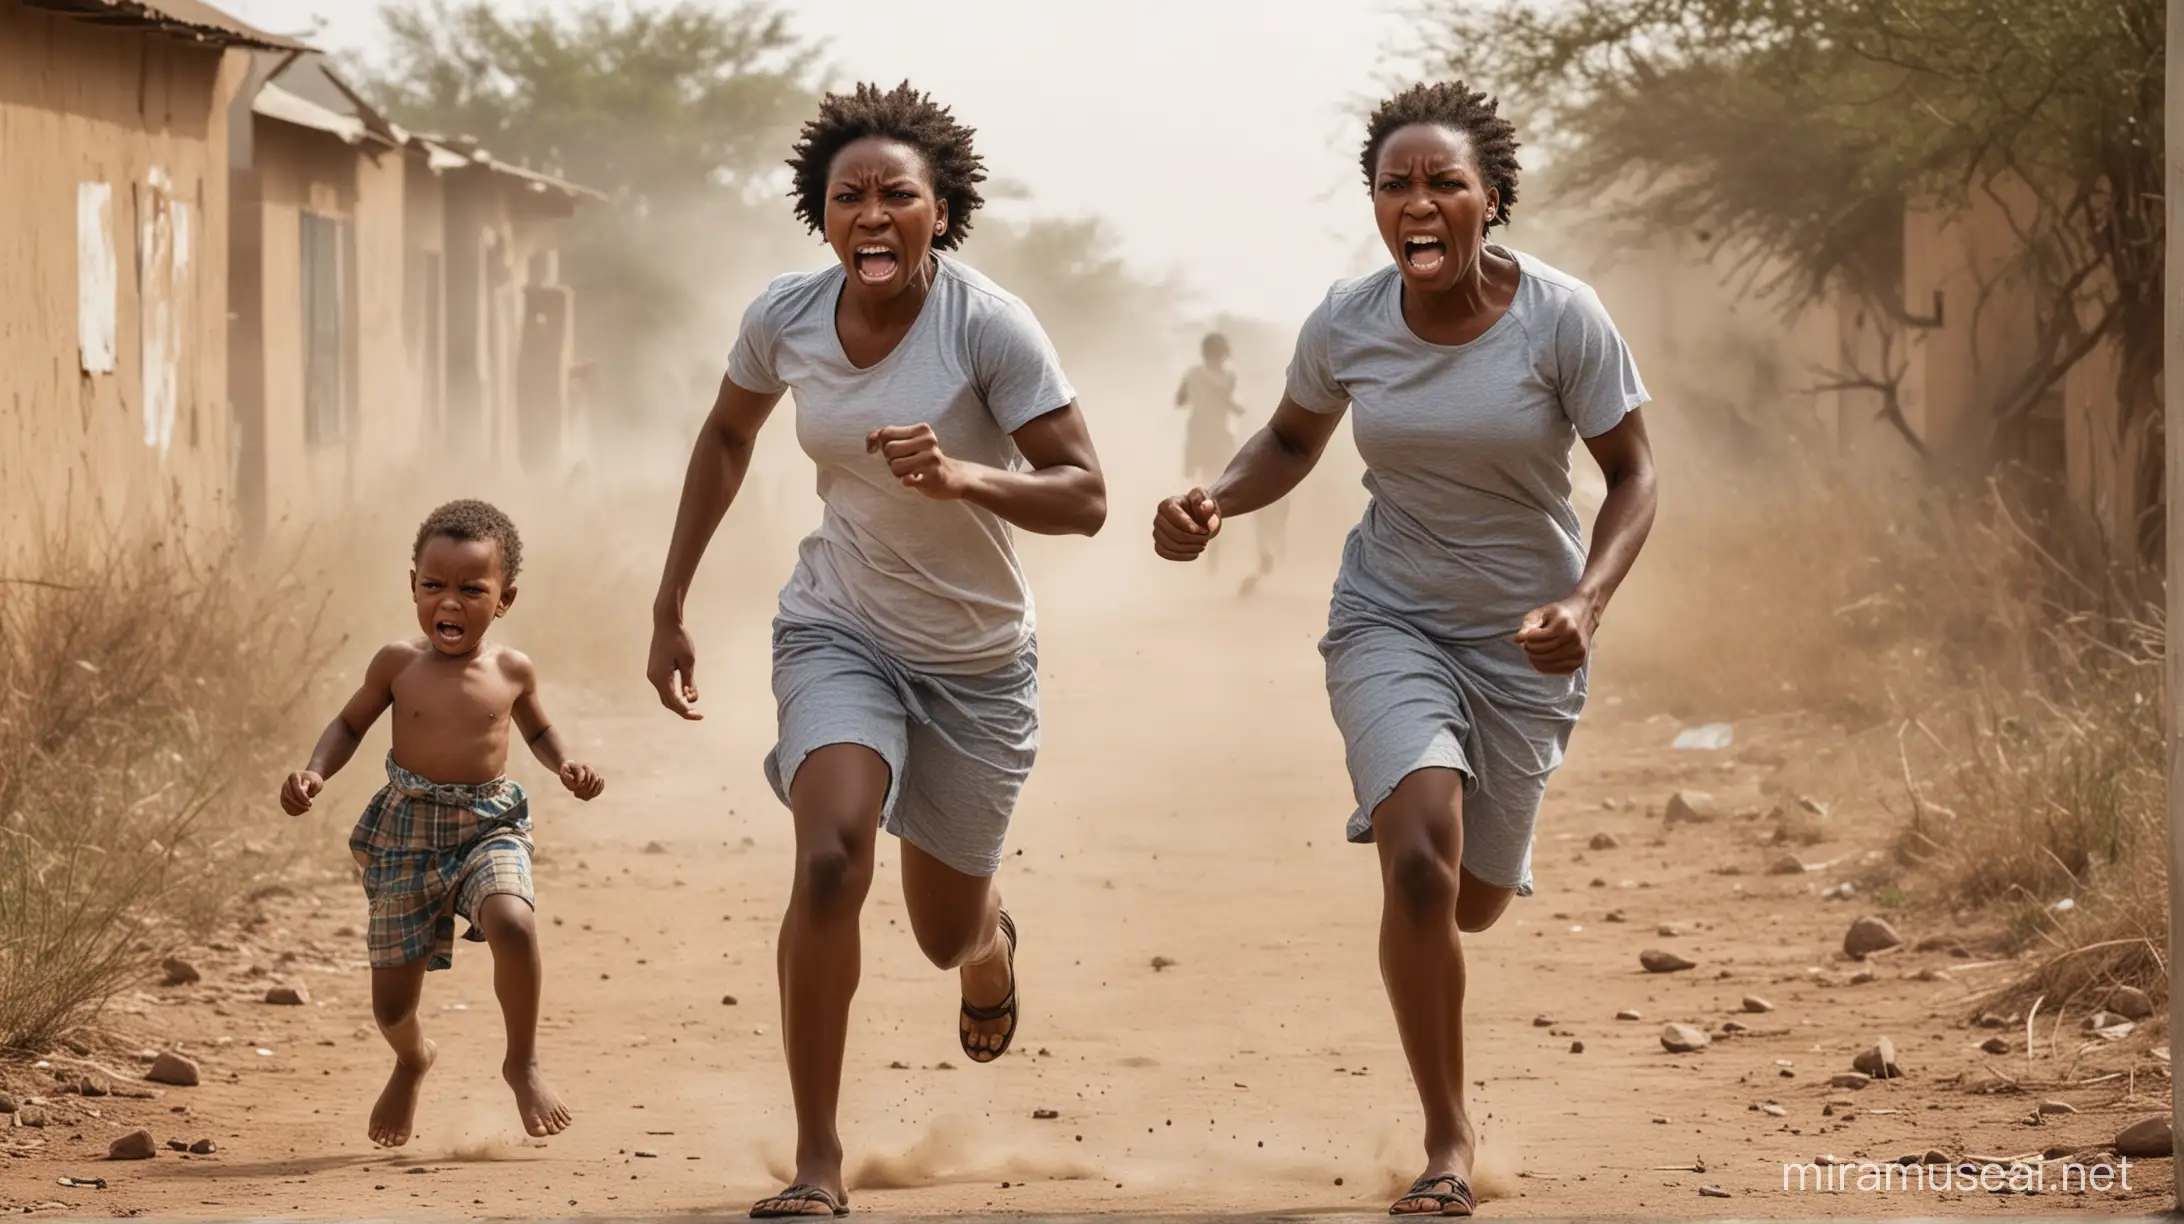 a photo of an angry mother chasing her son while he runs infront of her crying. they are all africans